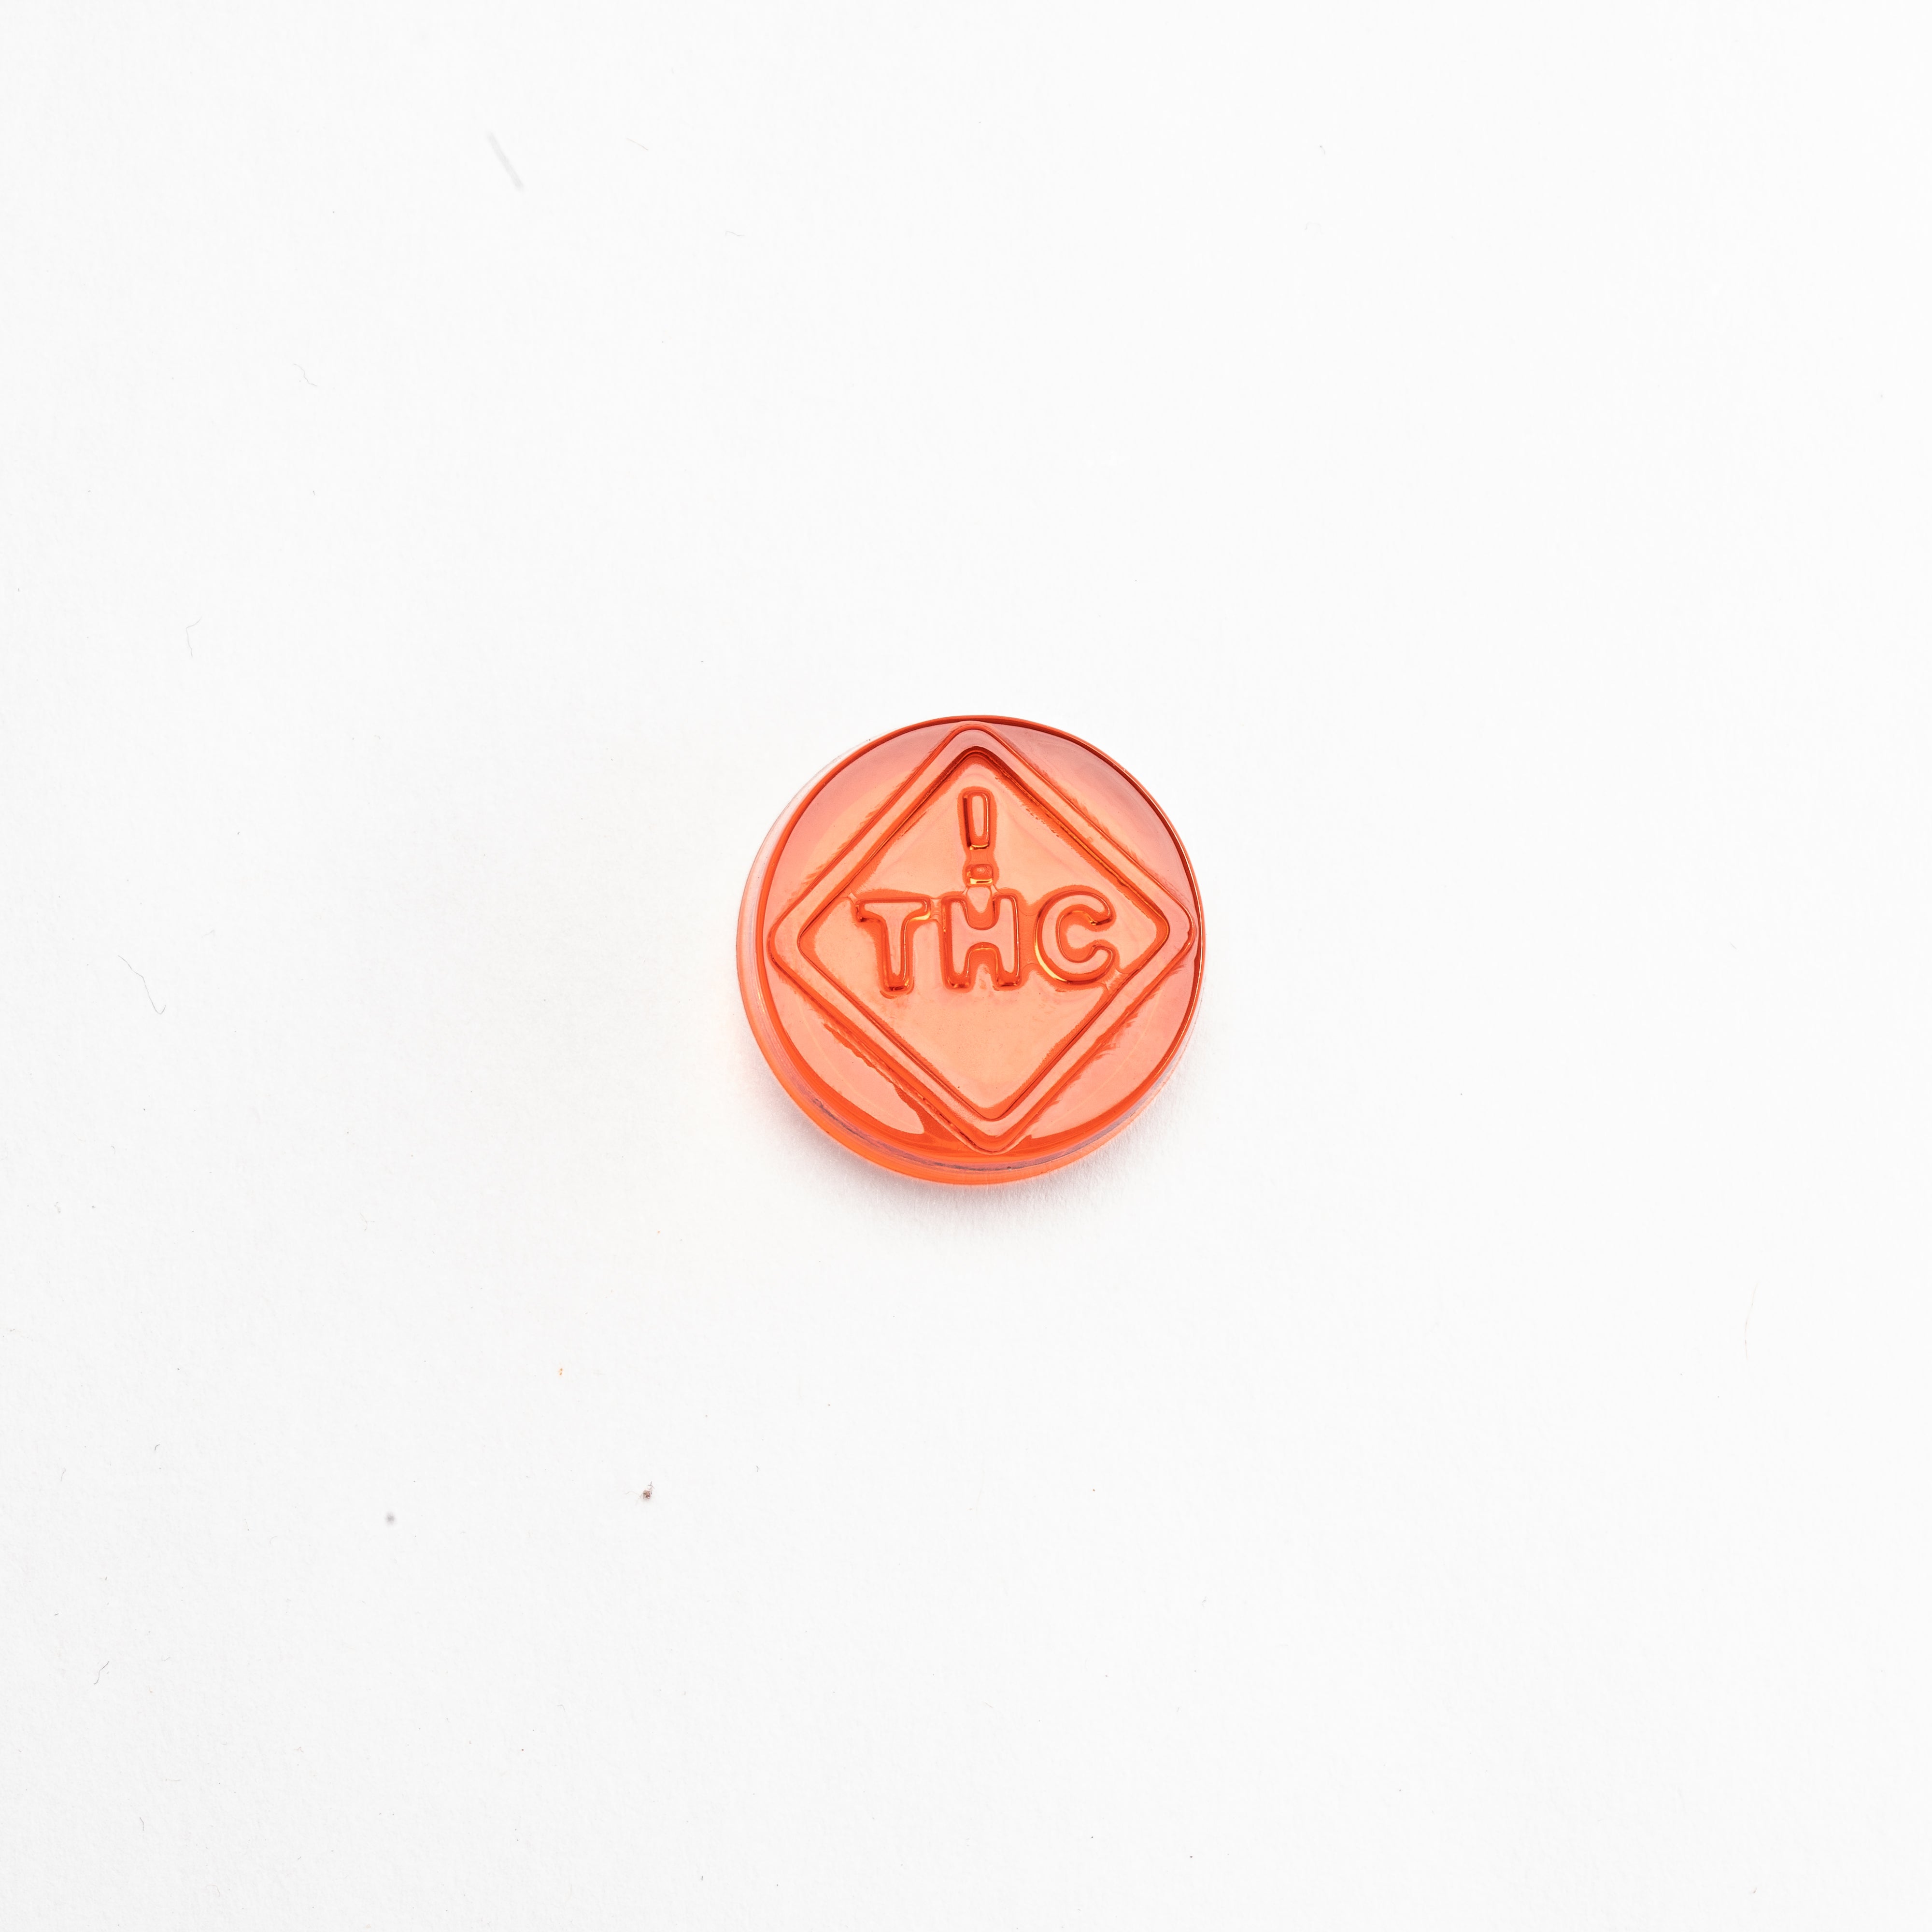 2mL Round Candy Mold - CO, FL, NM, OH THC Symbol - 165 Cavities - 22049